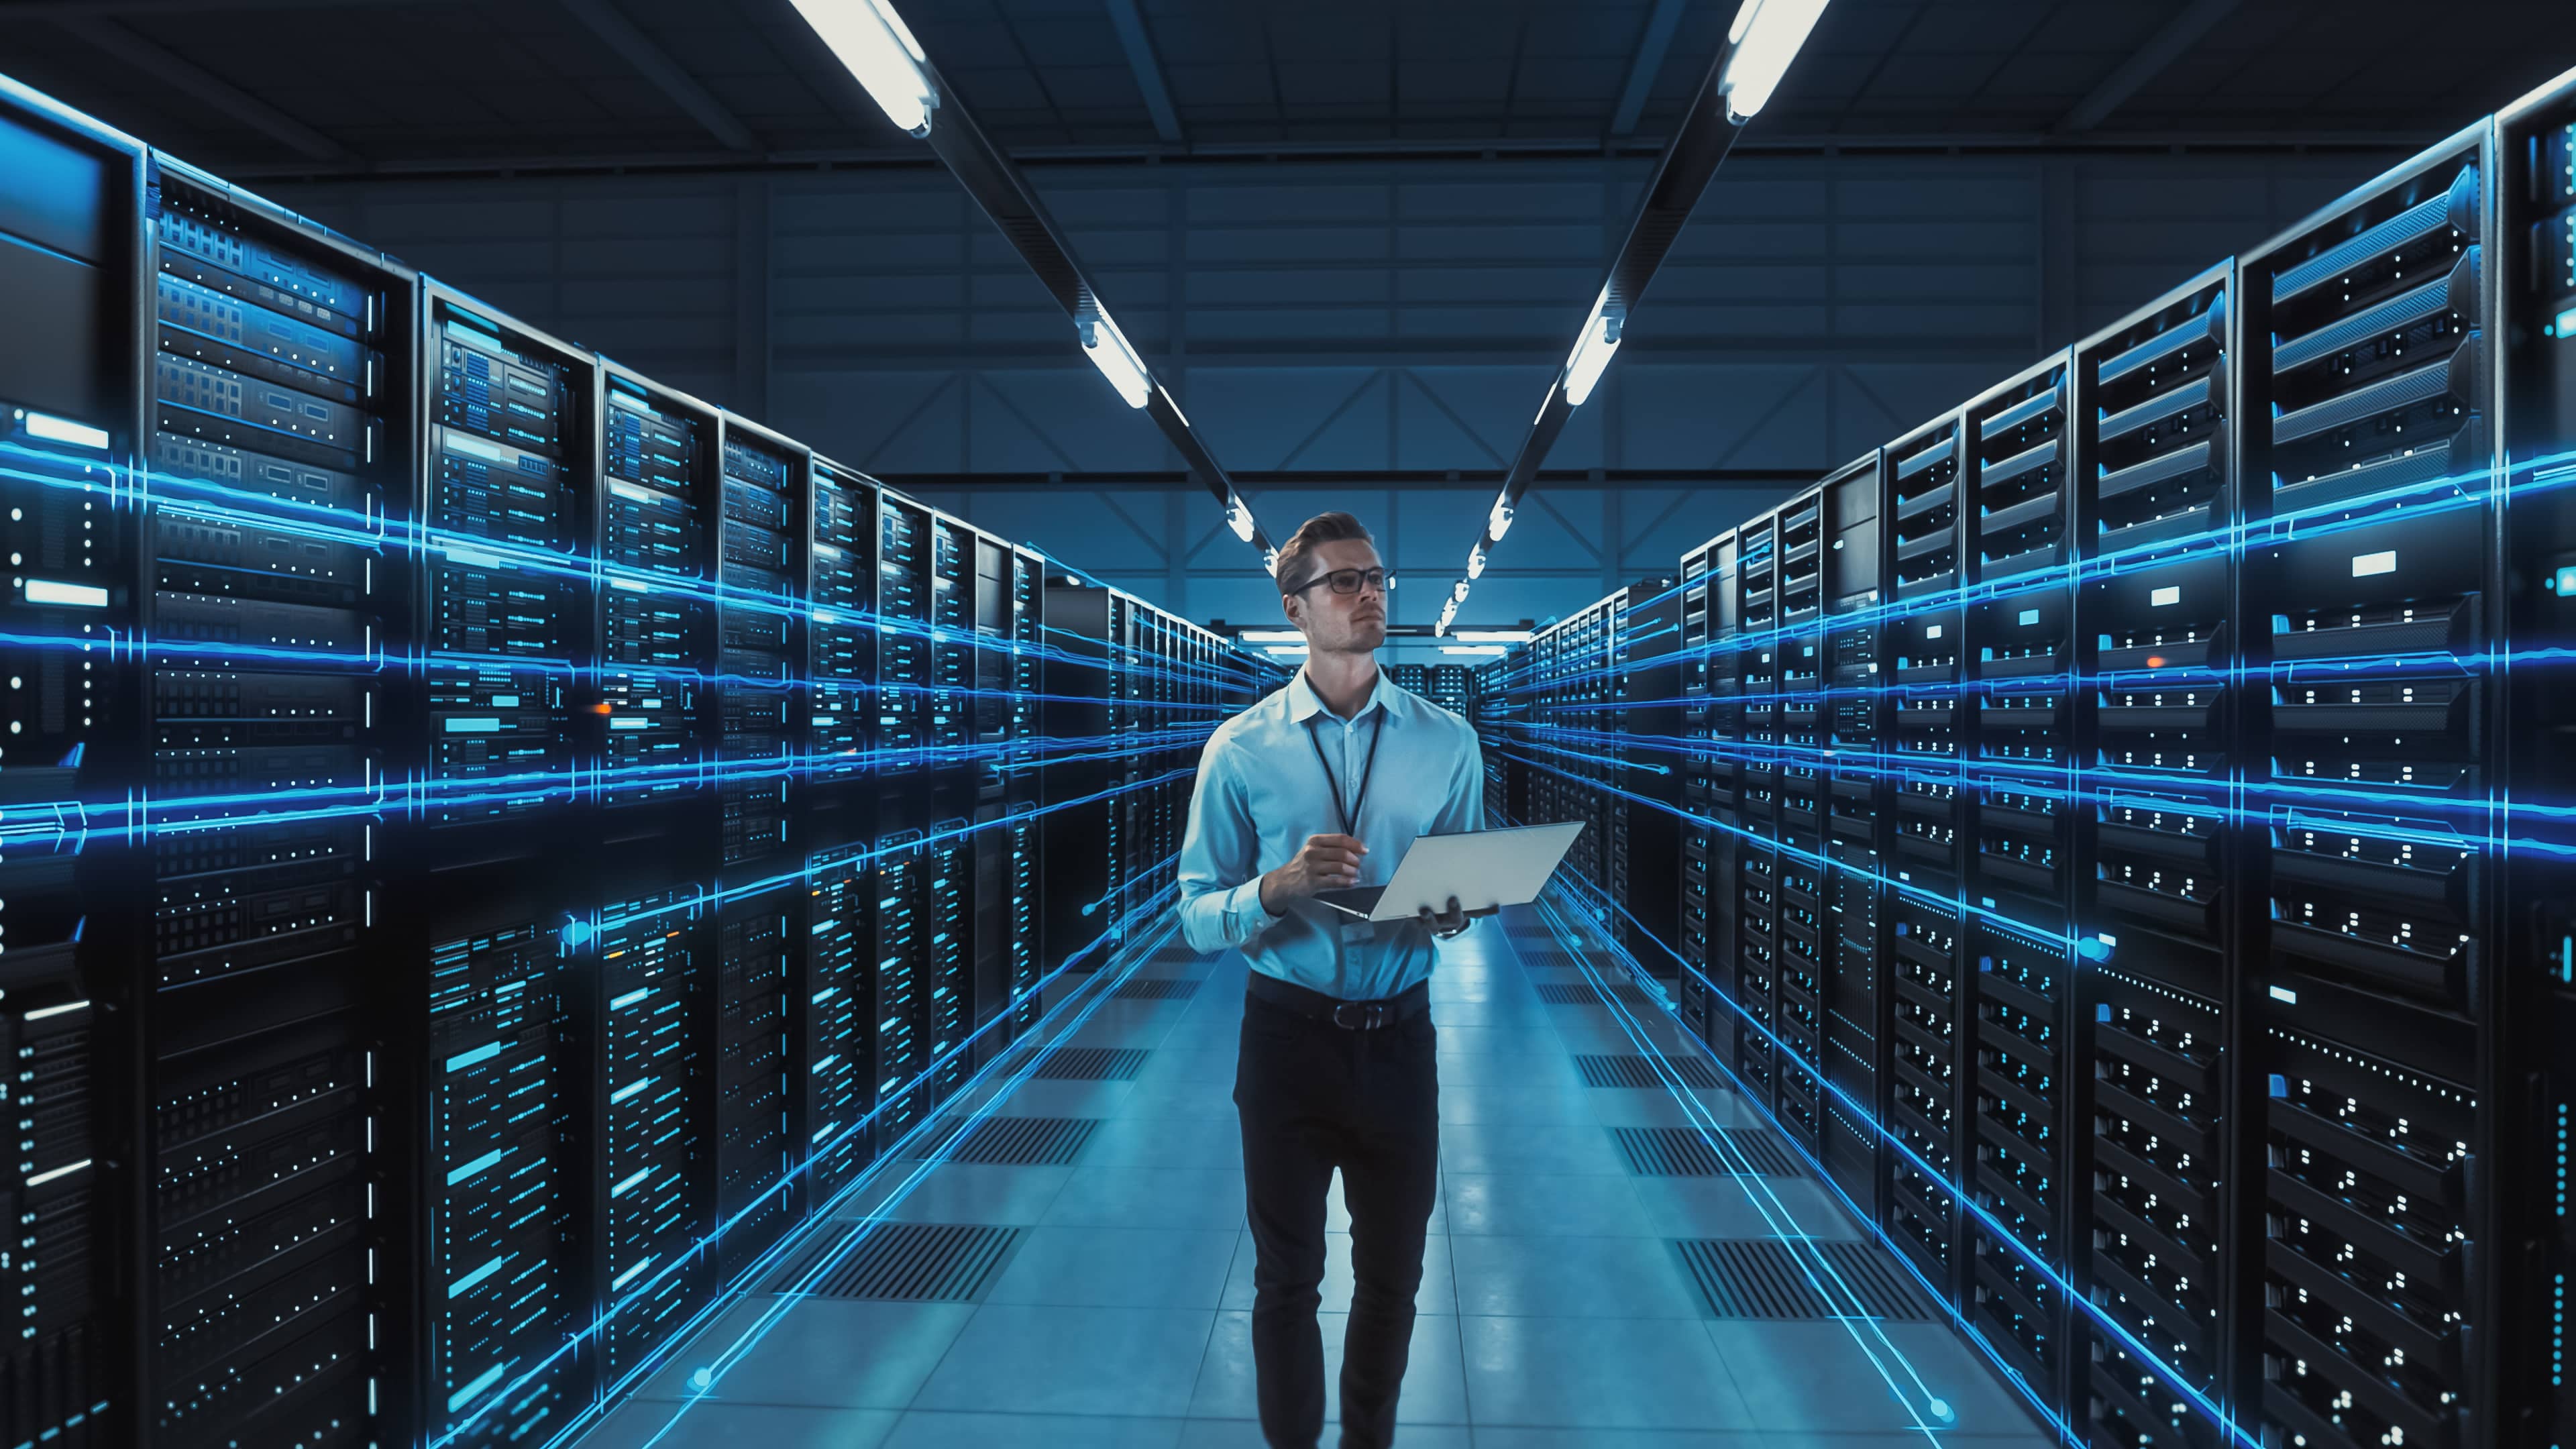 IT professional walking through a data center with rows of servers, representing the cloud compliance services offered by Fast Fixx to ensure cloud environments meet regulatory and security requirements